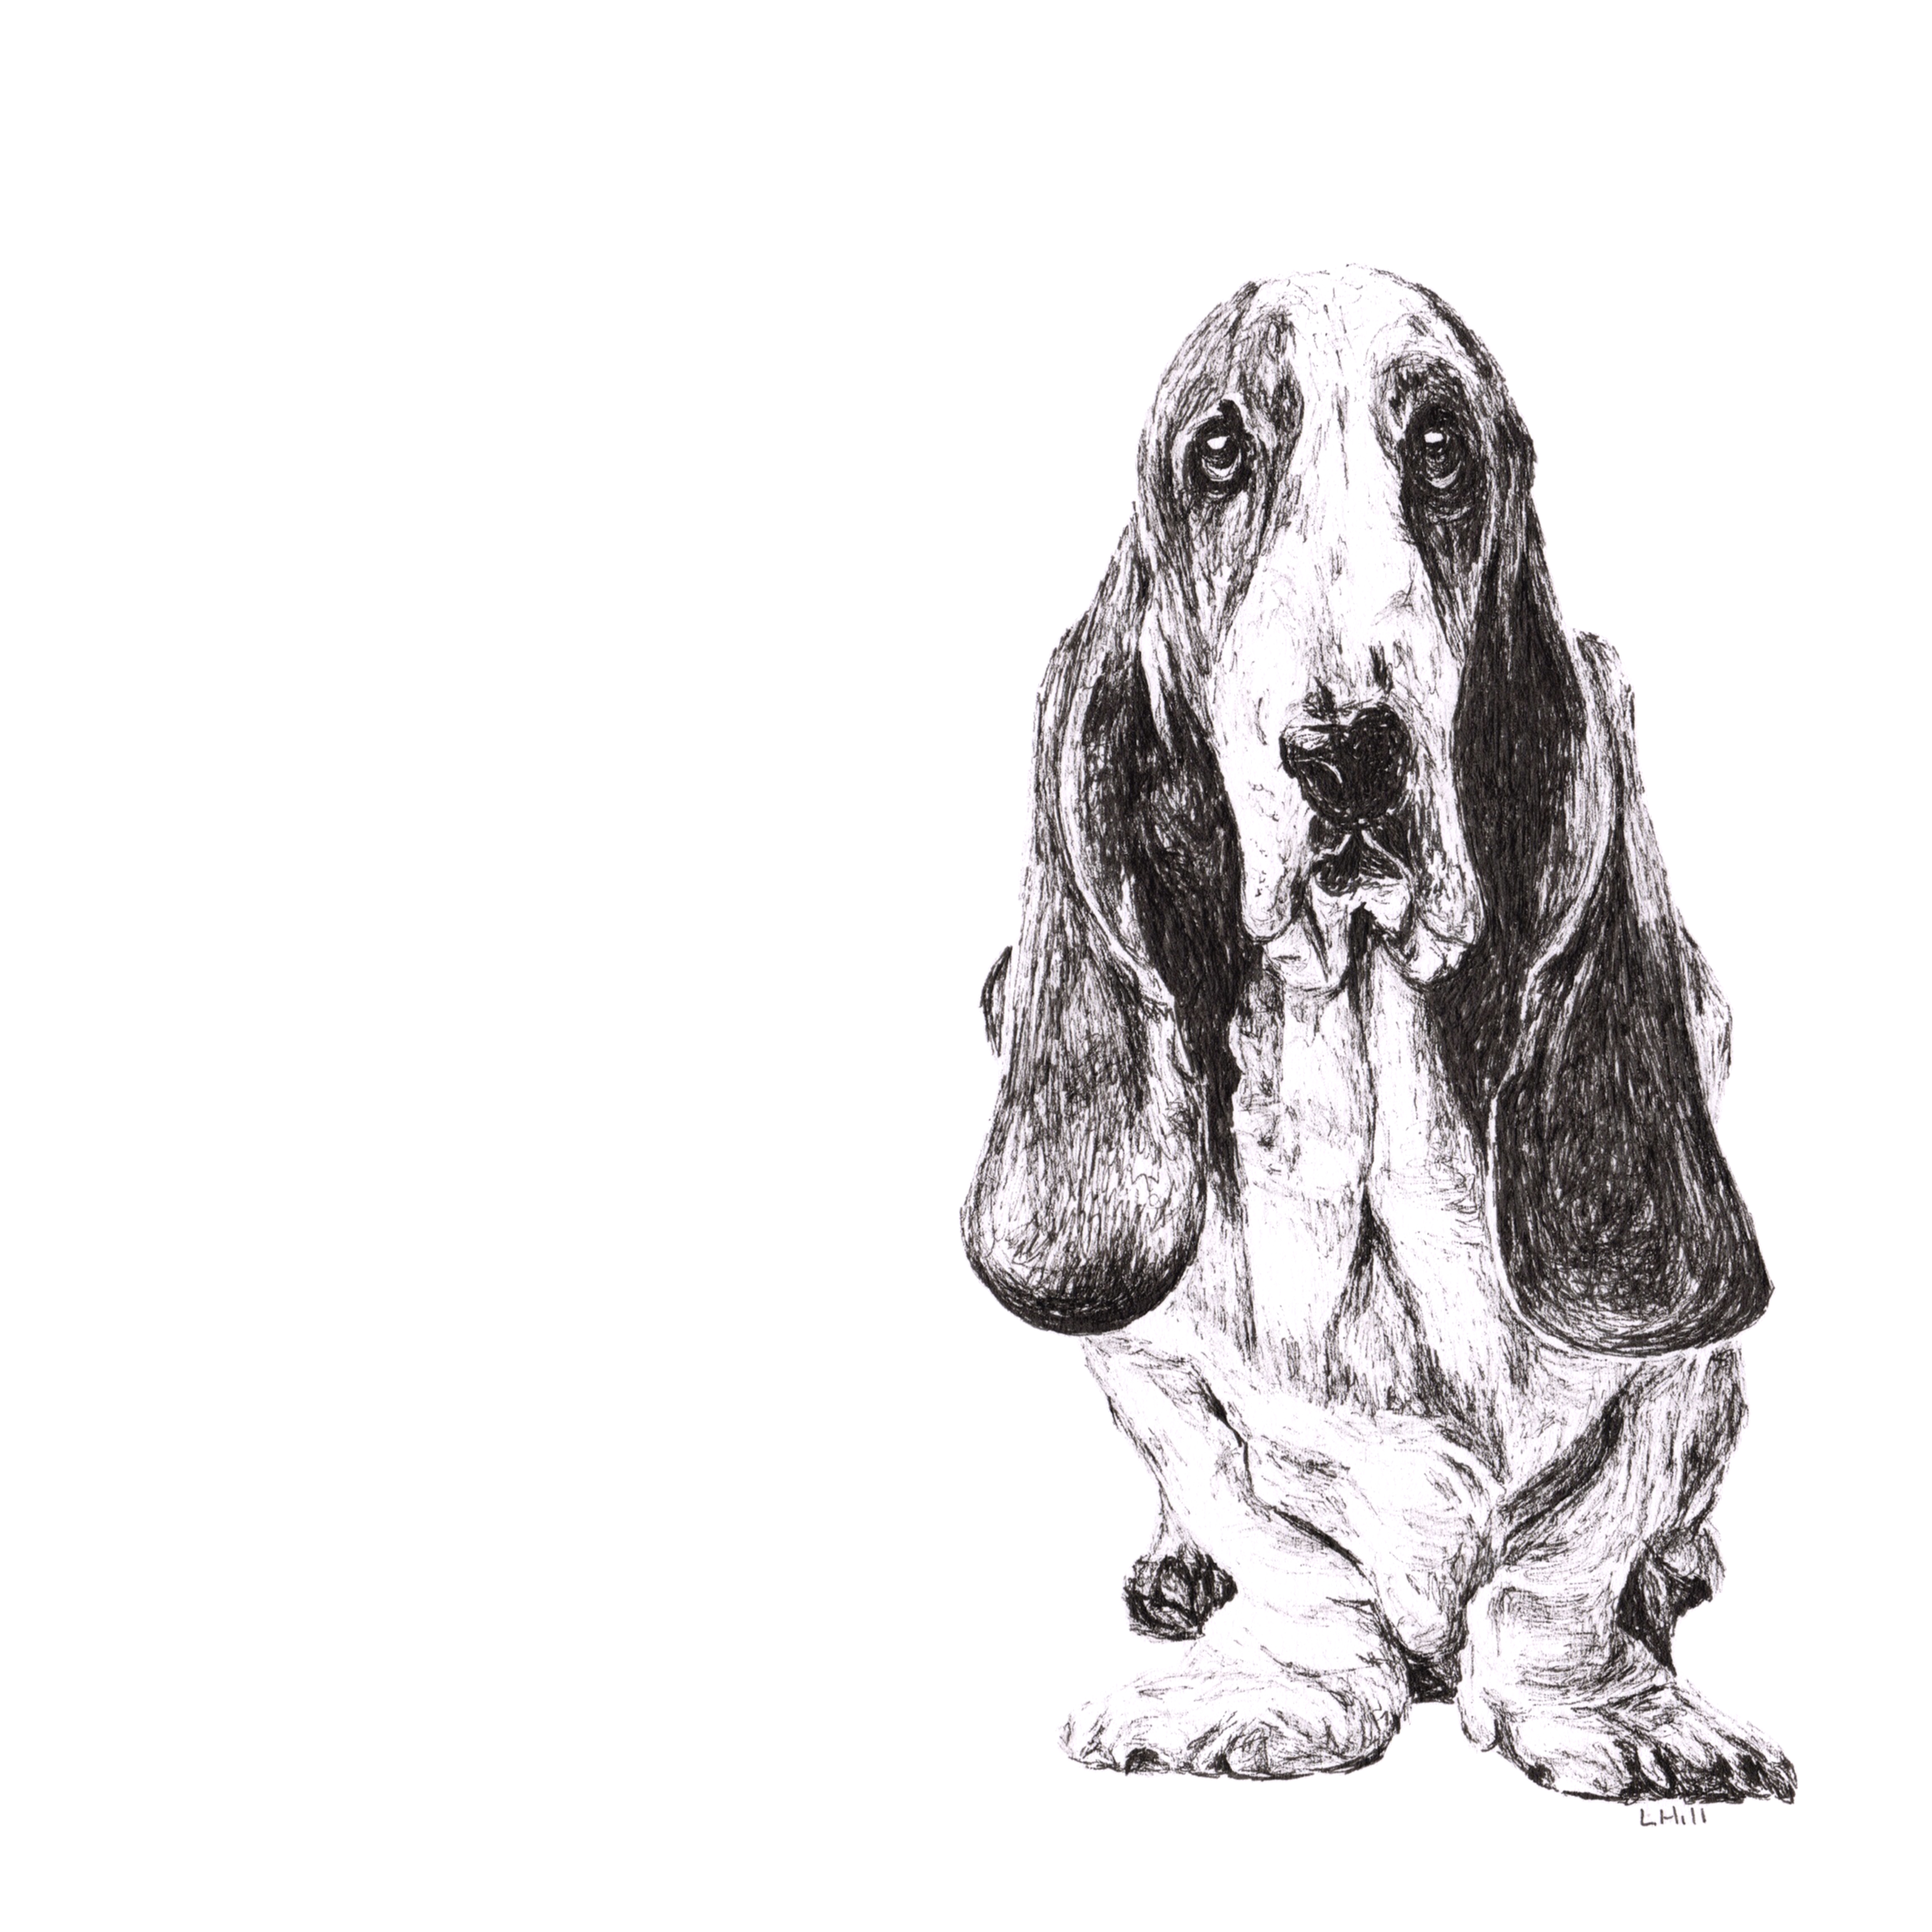 Basset Hound pen and ink illustration by Louisa Hill